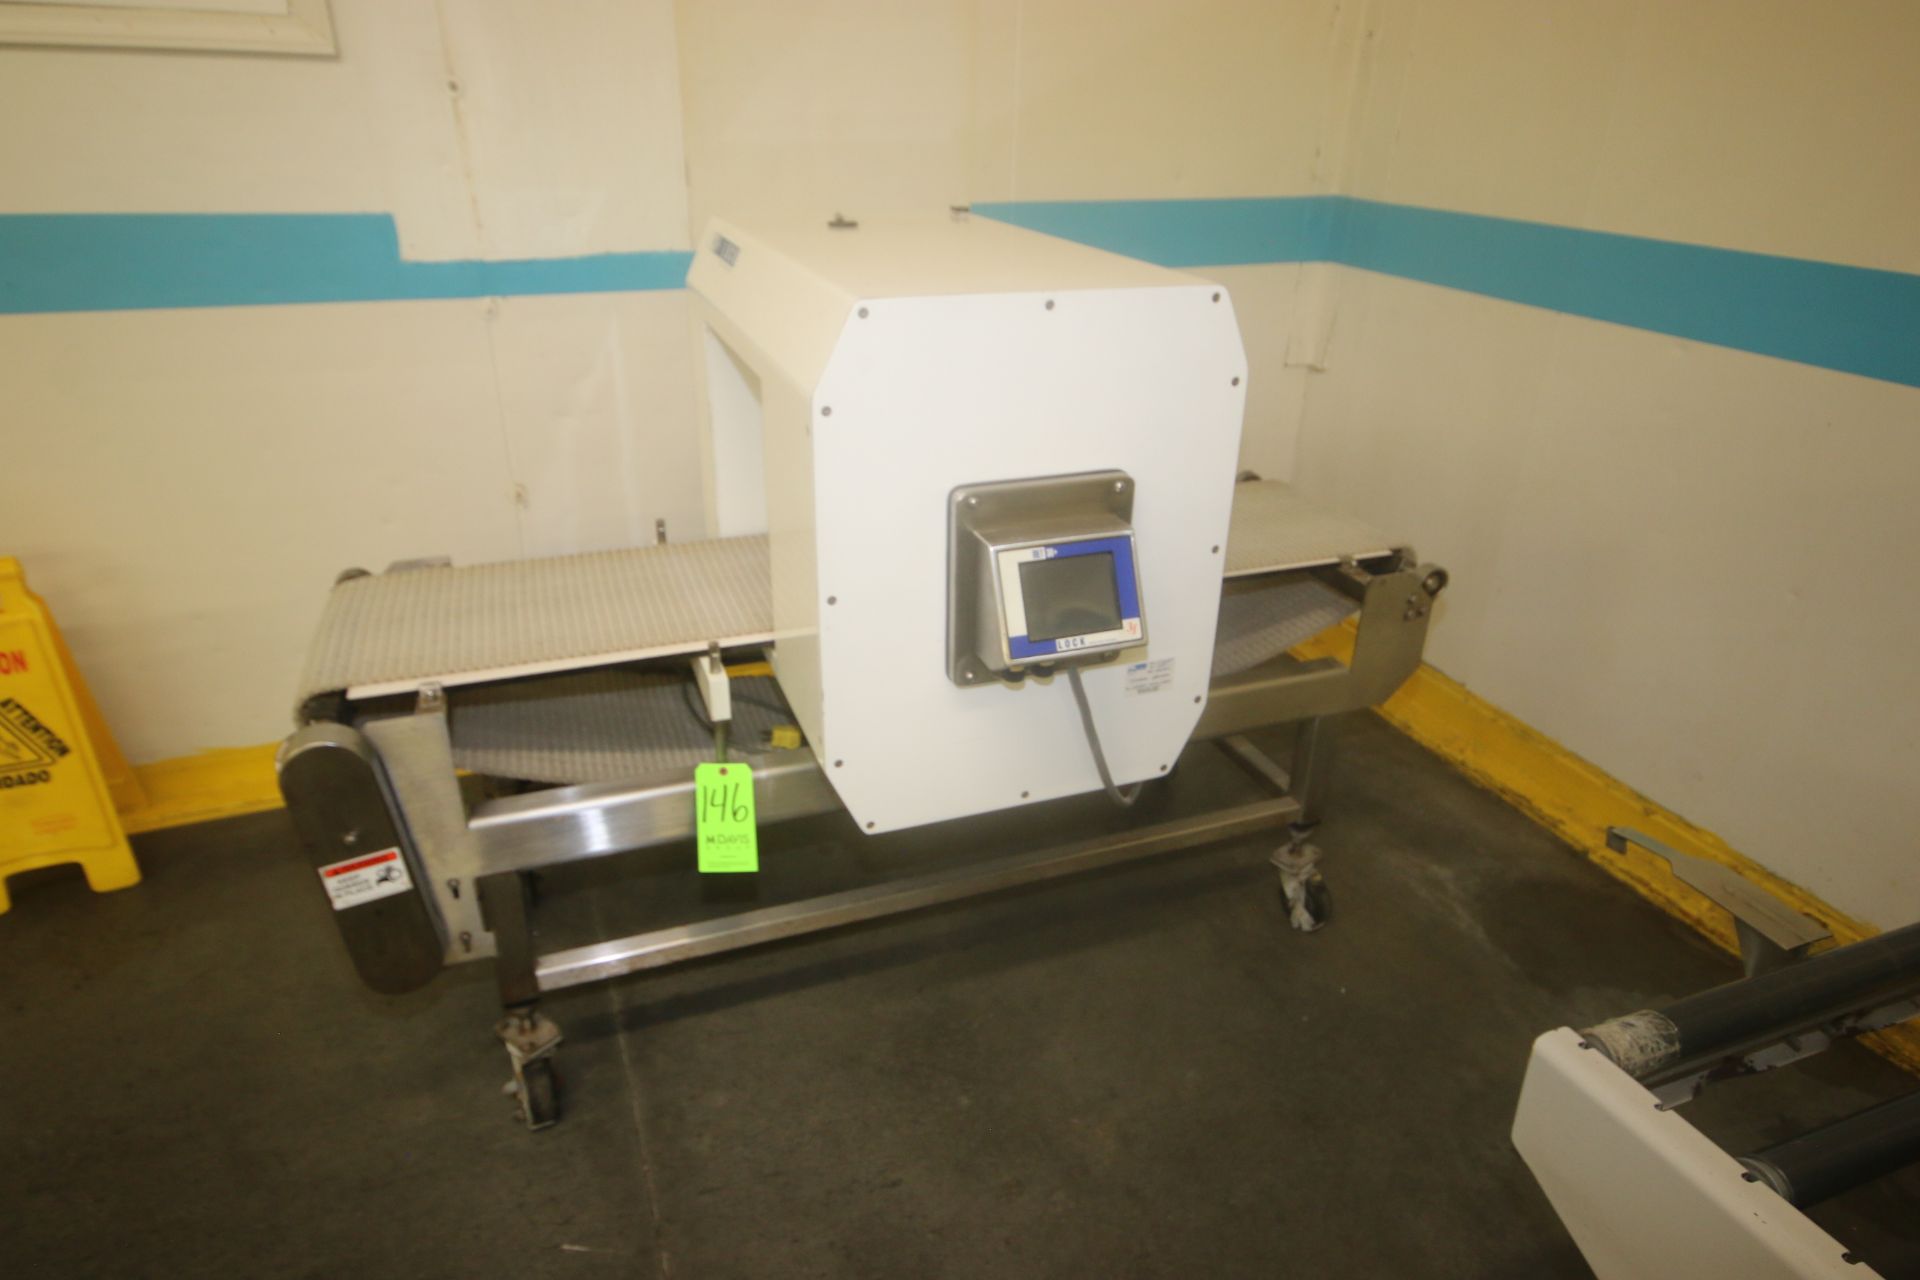 Lock Inspection Systems Metal Detector, M/N MET30+, S/N 27245, with Aprox. 18" W x 16" H x 22" Deep,